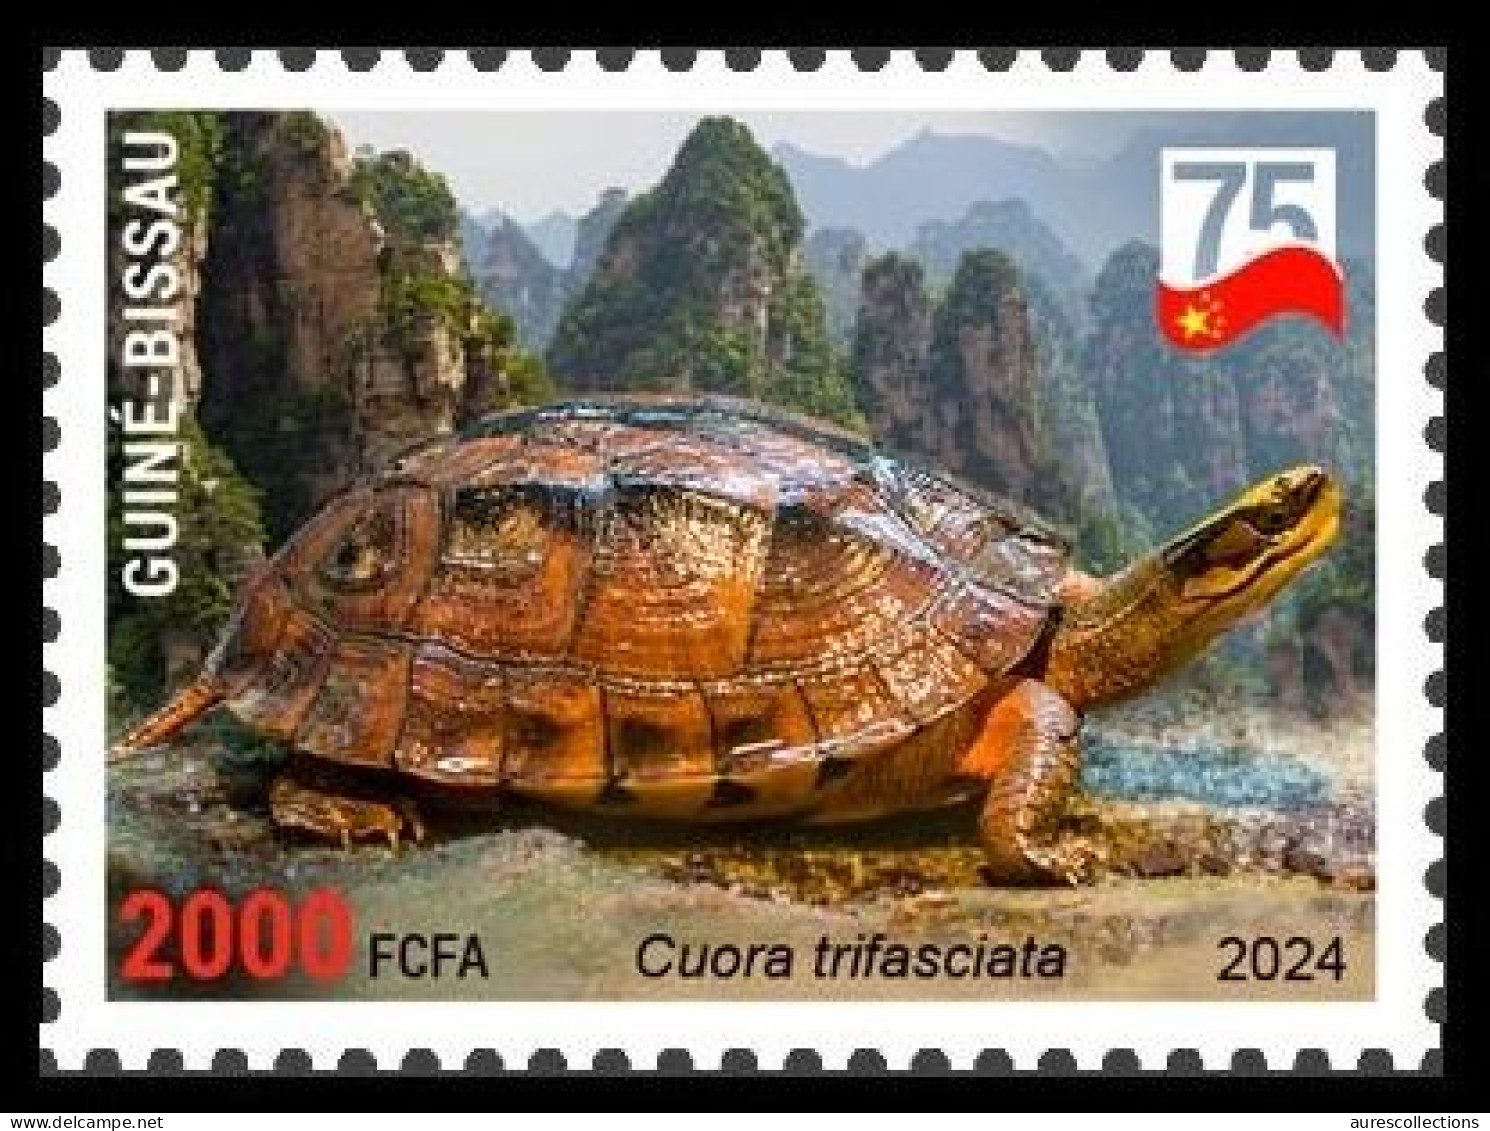 GUINEA BISSAU 2024 STAMP 1V - CHINA AMPHIBIANS & REPTILES - GOLDEN COIN TURTLE TURTLES TORTUES - CHINA 75 ANNIV. - MNH - Tortues